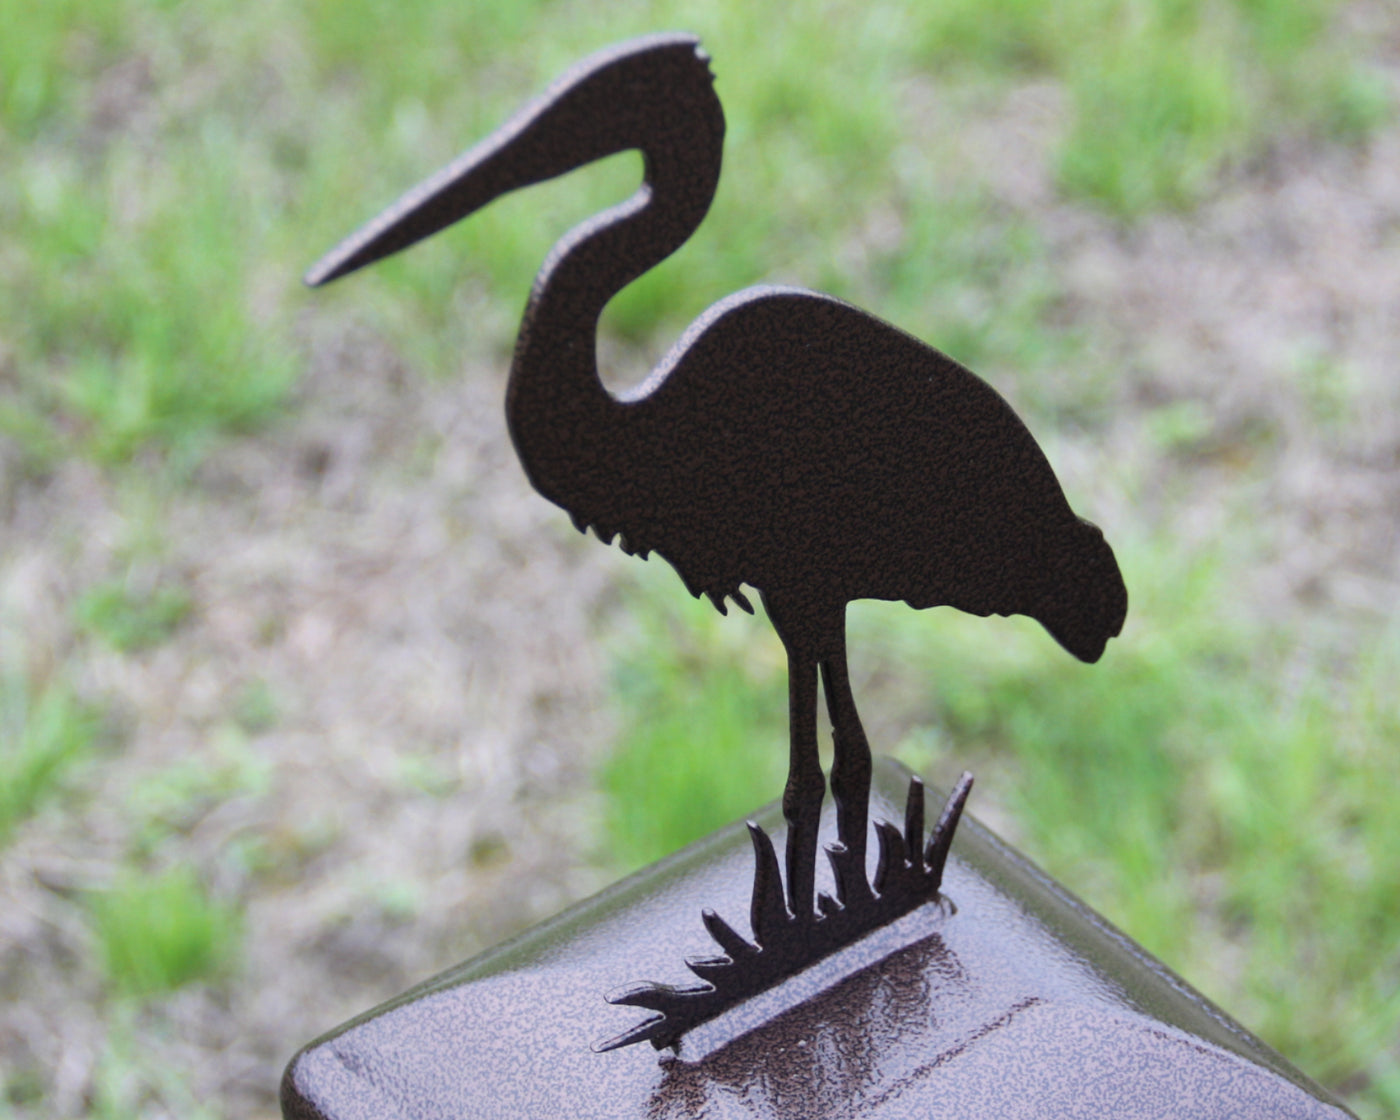 6x6 Blue Heron - Madison Iron and Wood - Post Cap - metal outdoor decor - Steel deocrations - american made products - veteran owned business products - fencing decorations - fencing supplies - custom wall decorations - personalized wall signs - steel - decorative post caps - steel post caps - metal post caps - brackets - structural brackets - home improvement - mothers day - mothers day gift - mothers day ideas - summer decor - spring decor- spring yard decor - summer yard decor